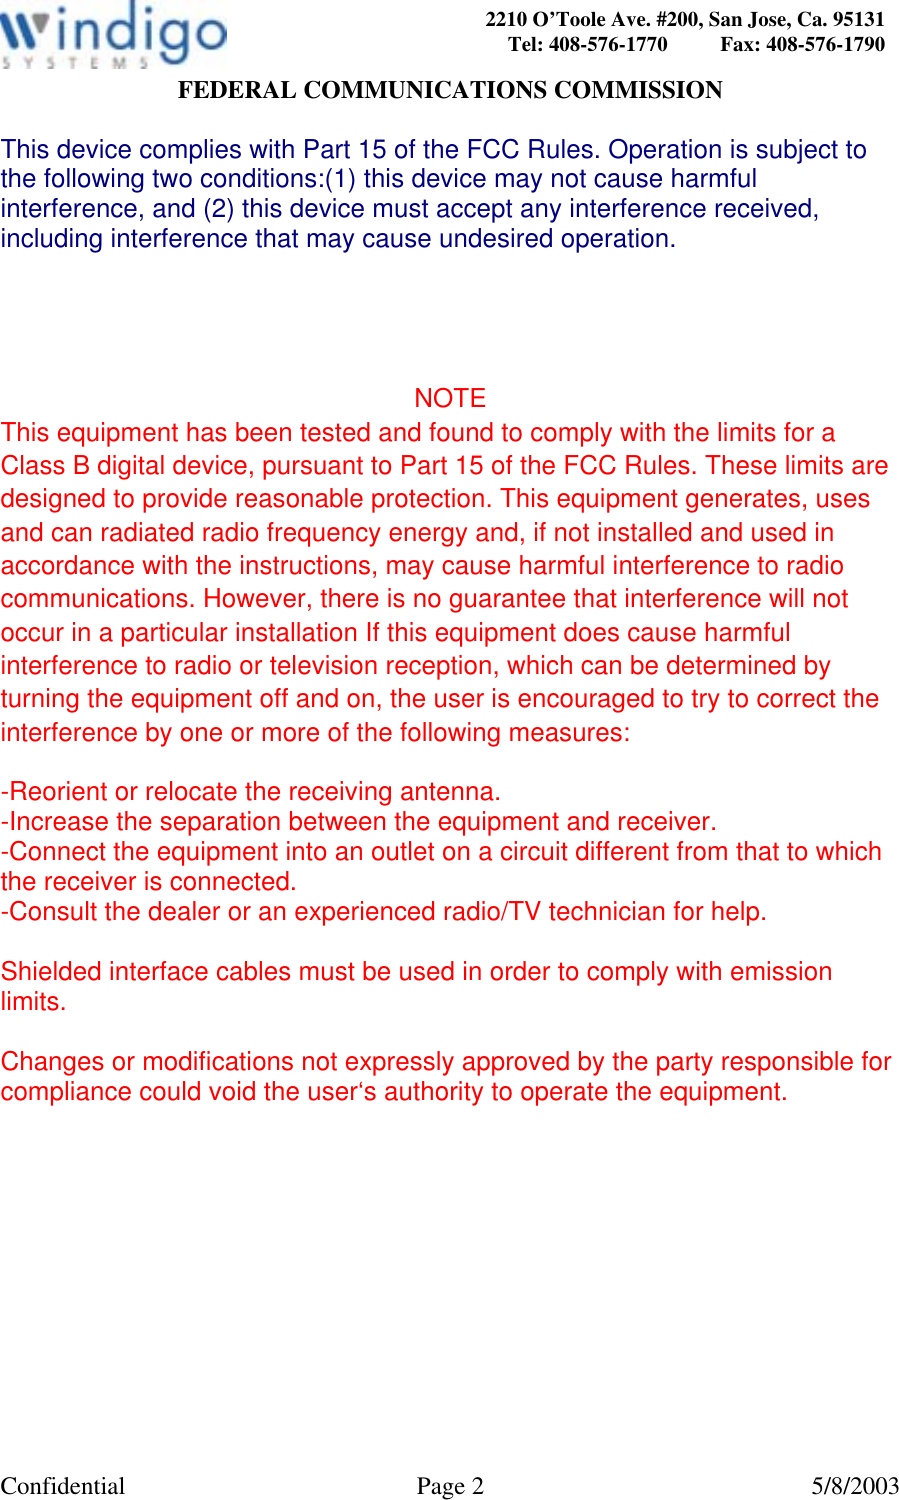  Confidential Page 2  5/8/2003 2210 O’Toole Ave. #200, San Jose, Ca. 95131 Tel: 408-576-1770          Fax: 408-576-1790FEDERAL COMMUNICATIONS COMMISSION  This device complies with Part 15 of the FCC Rules. Operation is subject to the following two conditions:(1) this device may not cause harmful interference, and (2) this device must accept any interference received, including interference that may cause undesired operation.     NOTE This equipment has been tested and found to comply with the limits for a Class B digital device, pursuant to Part 15 of the FCC Rules. These limits are designed to provide reasonable protection. This equipment generates, uses and can radiated radio frequency energy and, if not installed and used in accordance with the instructions, may cause harmful interference to radio communications. However, there is no guarantee that interference will not occur in a particular installation If this equipment does cause harmful interference to radio or television reception, which can be determined by turning the equipment off and on, the user is encouraged to try to correct the interference by one or more of the following measures:  -Reorient or relocate the receiving antenna. -Increase the separation between the equipment and receiver. -Connect the equipment into an outlet on a circuit different from that to which the receiver is connected. -Consult the dealer or an experienced radio/TV technician for help.  Shielded interface cables must be used in order to comply with emission limits.  Changes or modifications not expressly approved by the party responsible for compliance could void the user‘s authority to operate the equipment.  